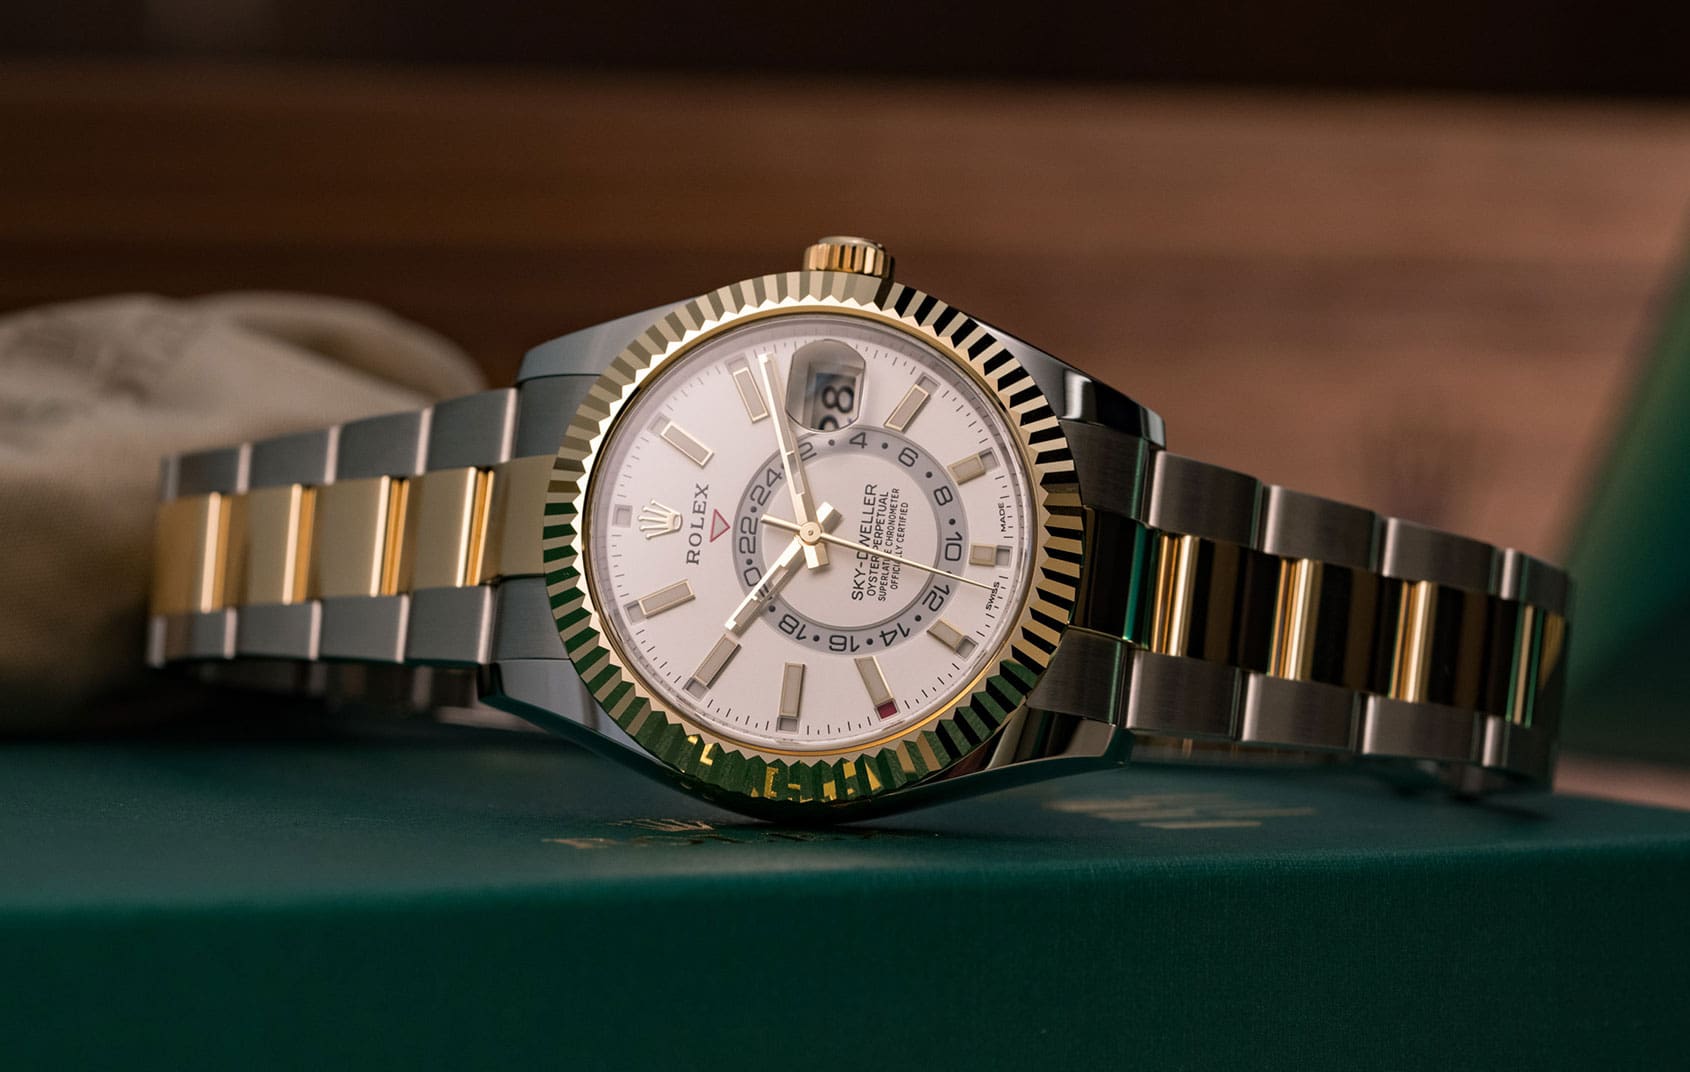 Taking another look at the Rolex Sky-Dweller Rolesor